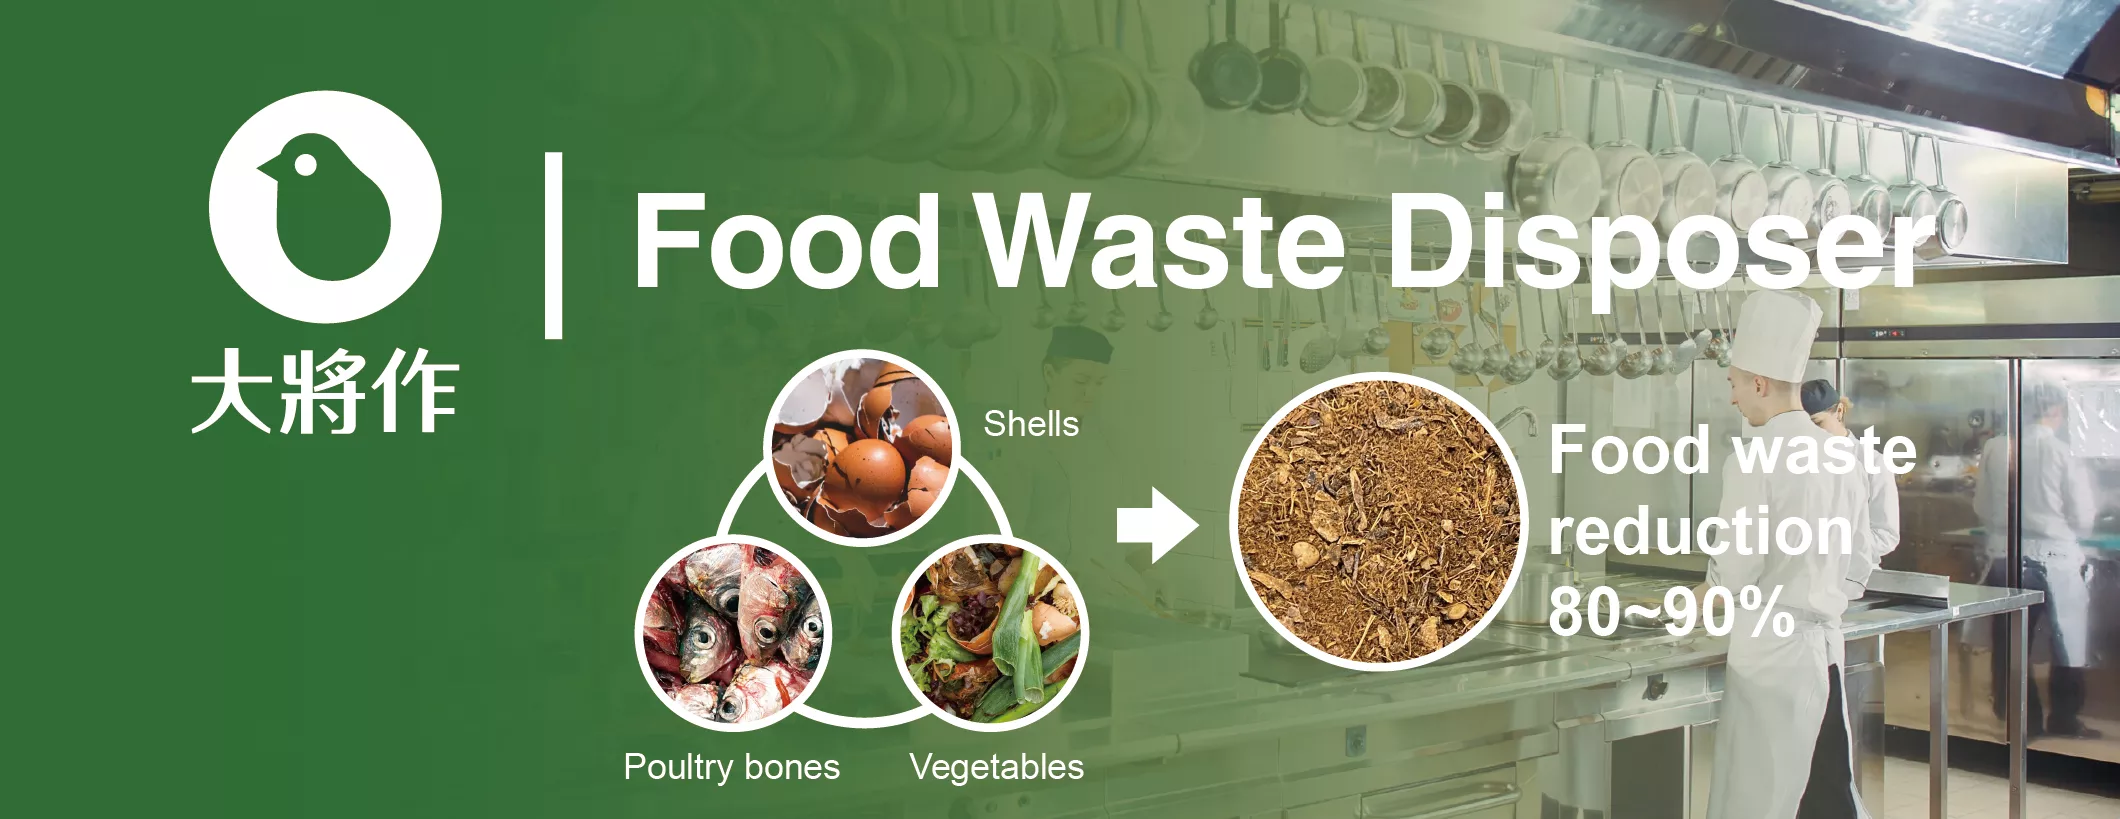 The all-new Commercial food waste disposer offers an easy solution to the problems faced by many food manufacturers, restaurants, hotel groups, hospitals, and government institutions. made in taiwan